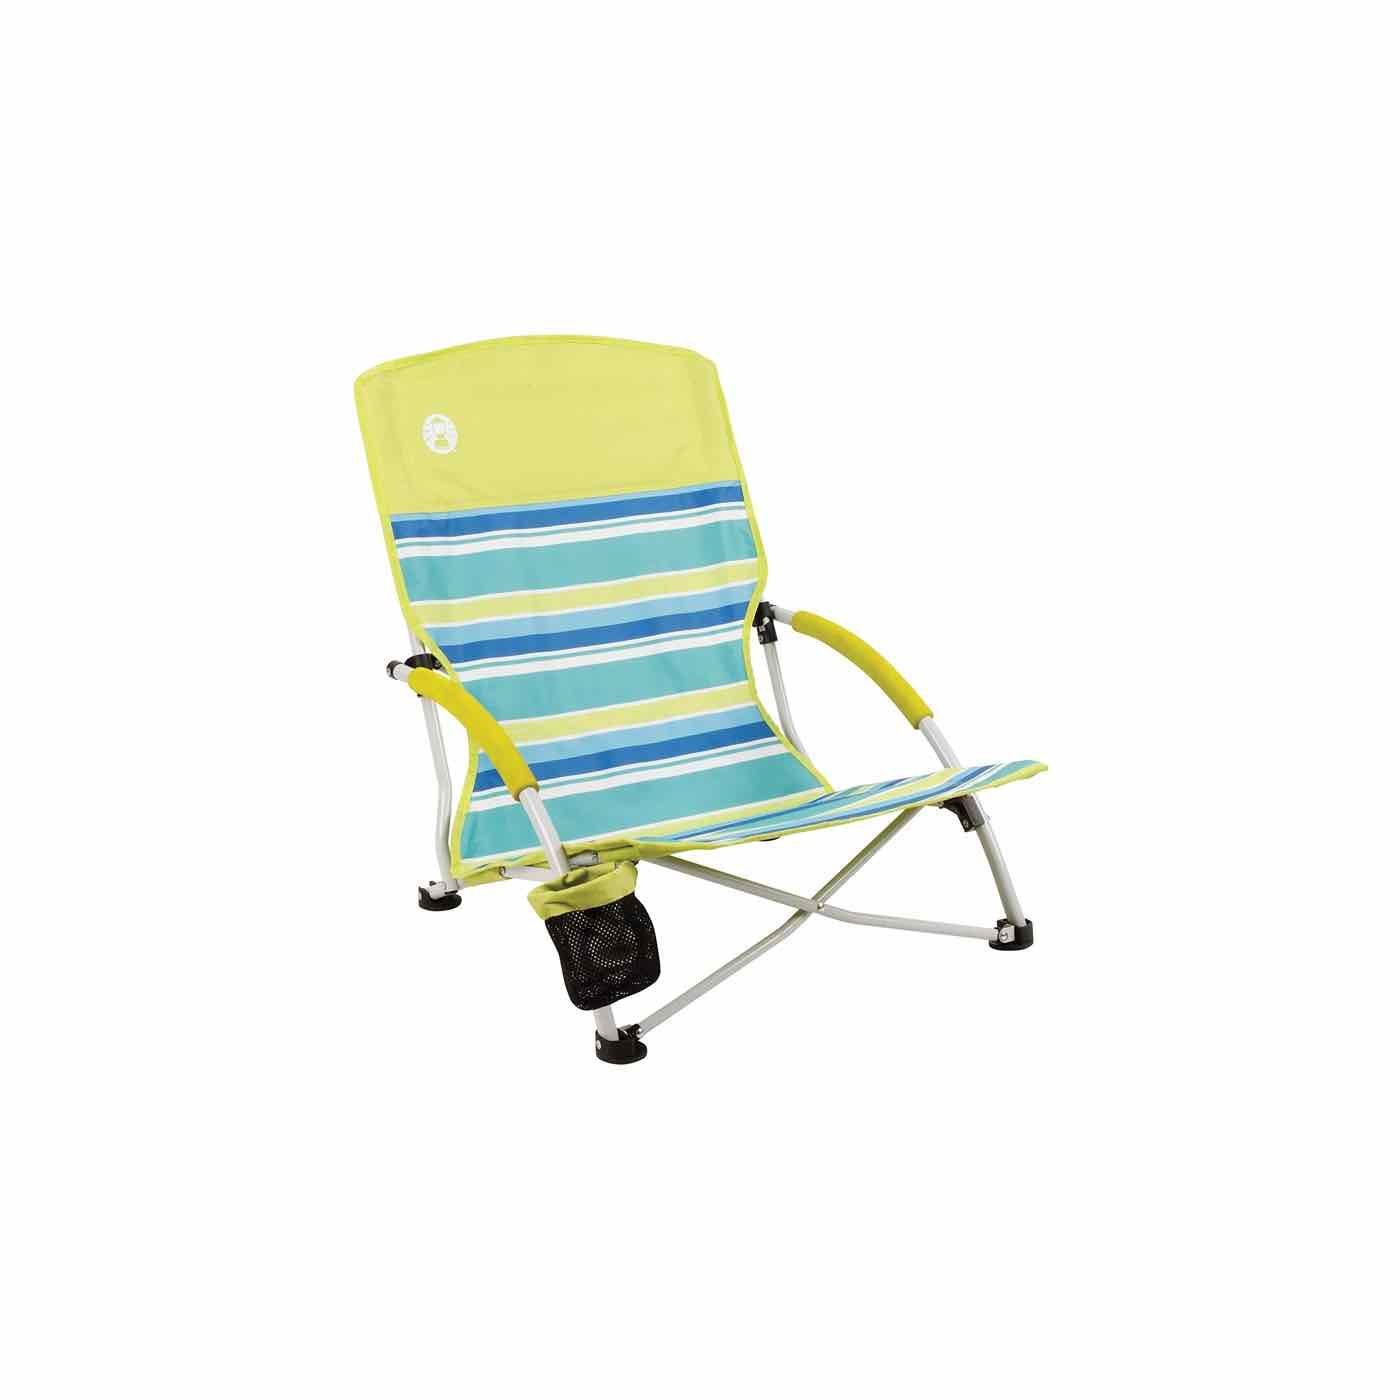 20 Best Beach Chairs For All Day Comfort 2021